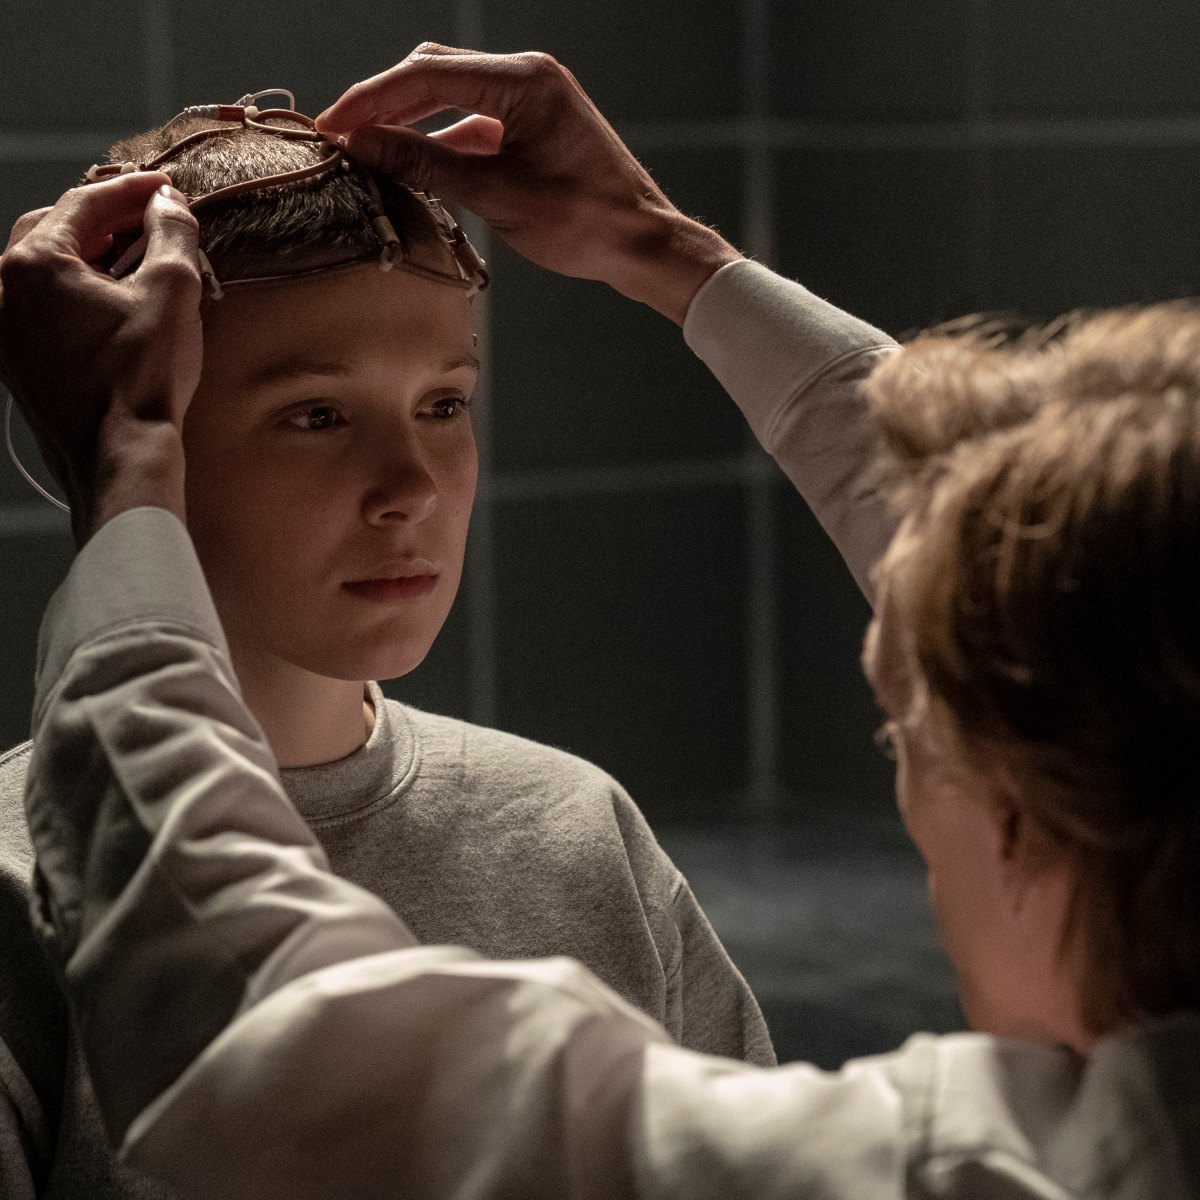 Photos from Stranger Things Season 4, Volume 2: Death Theories